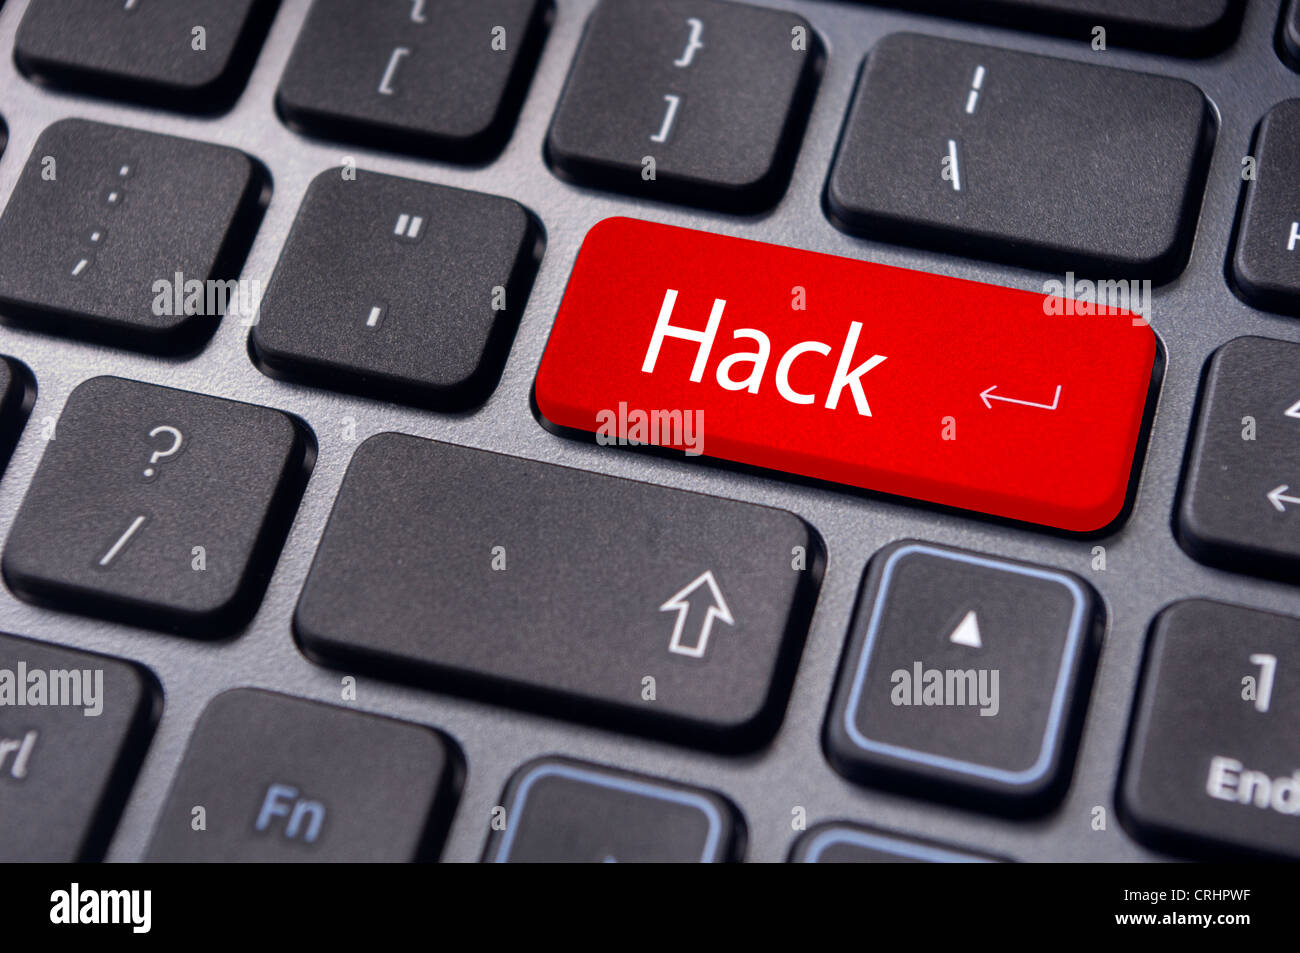 hack concepts of computer security, with a message on keyboard enter key. Stock Photo